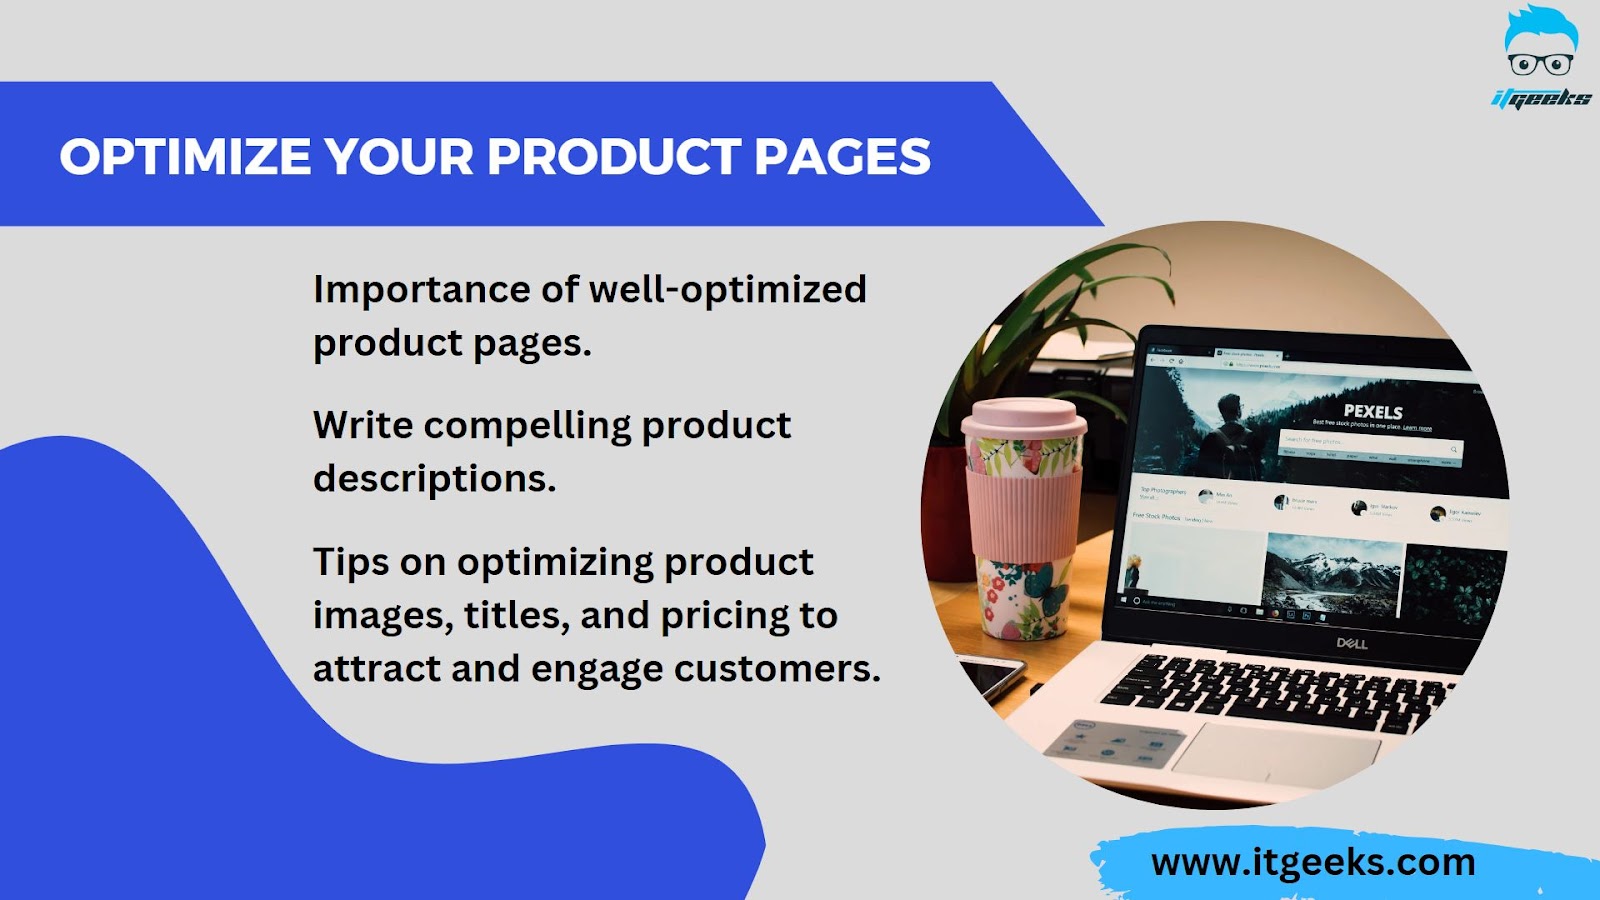 Optimize Your Product Pages